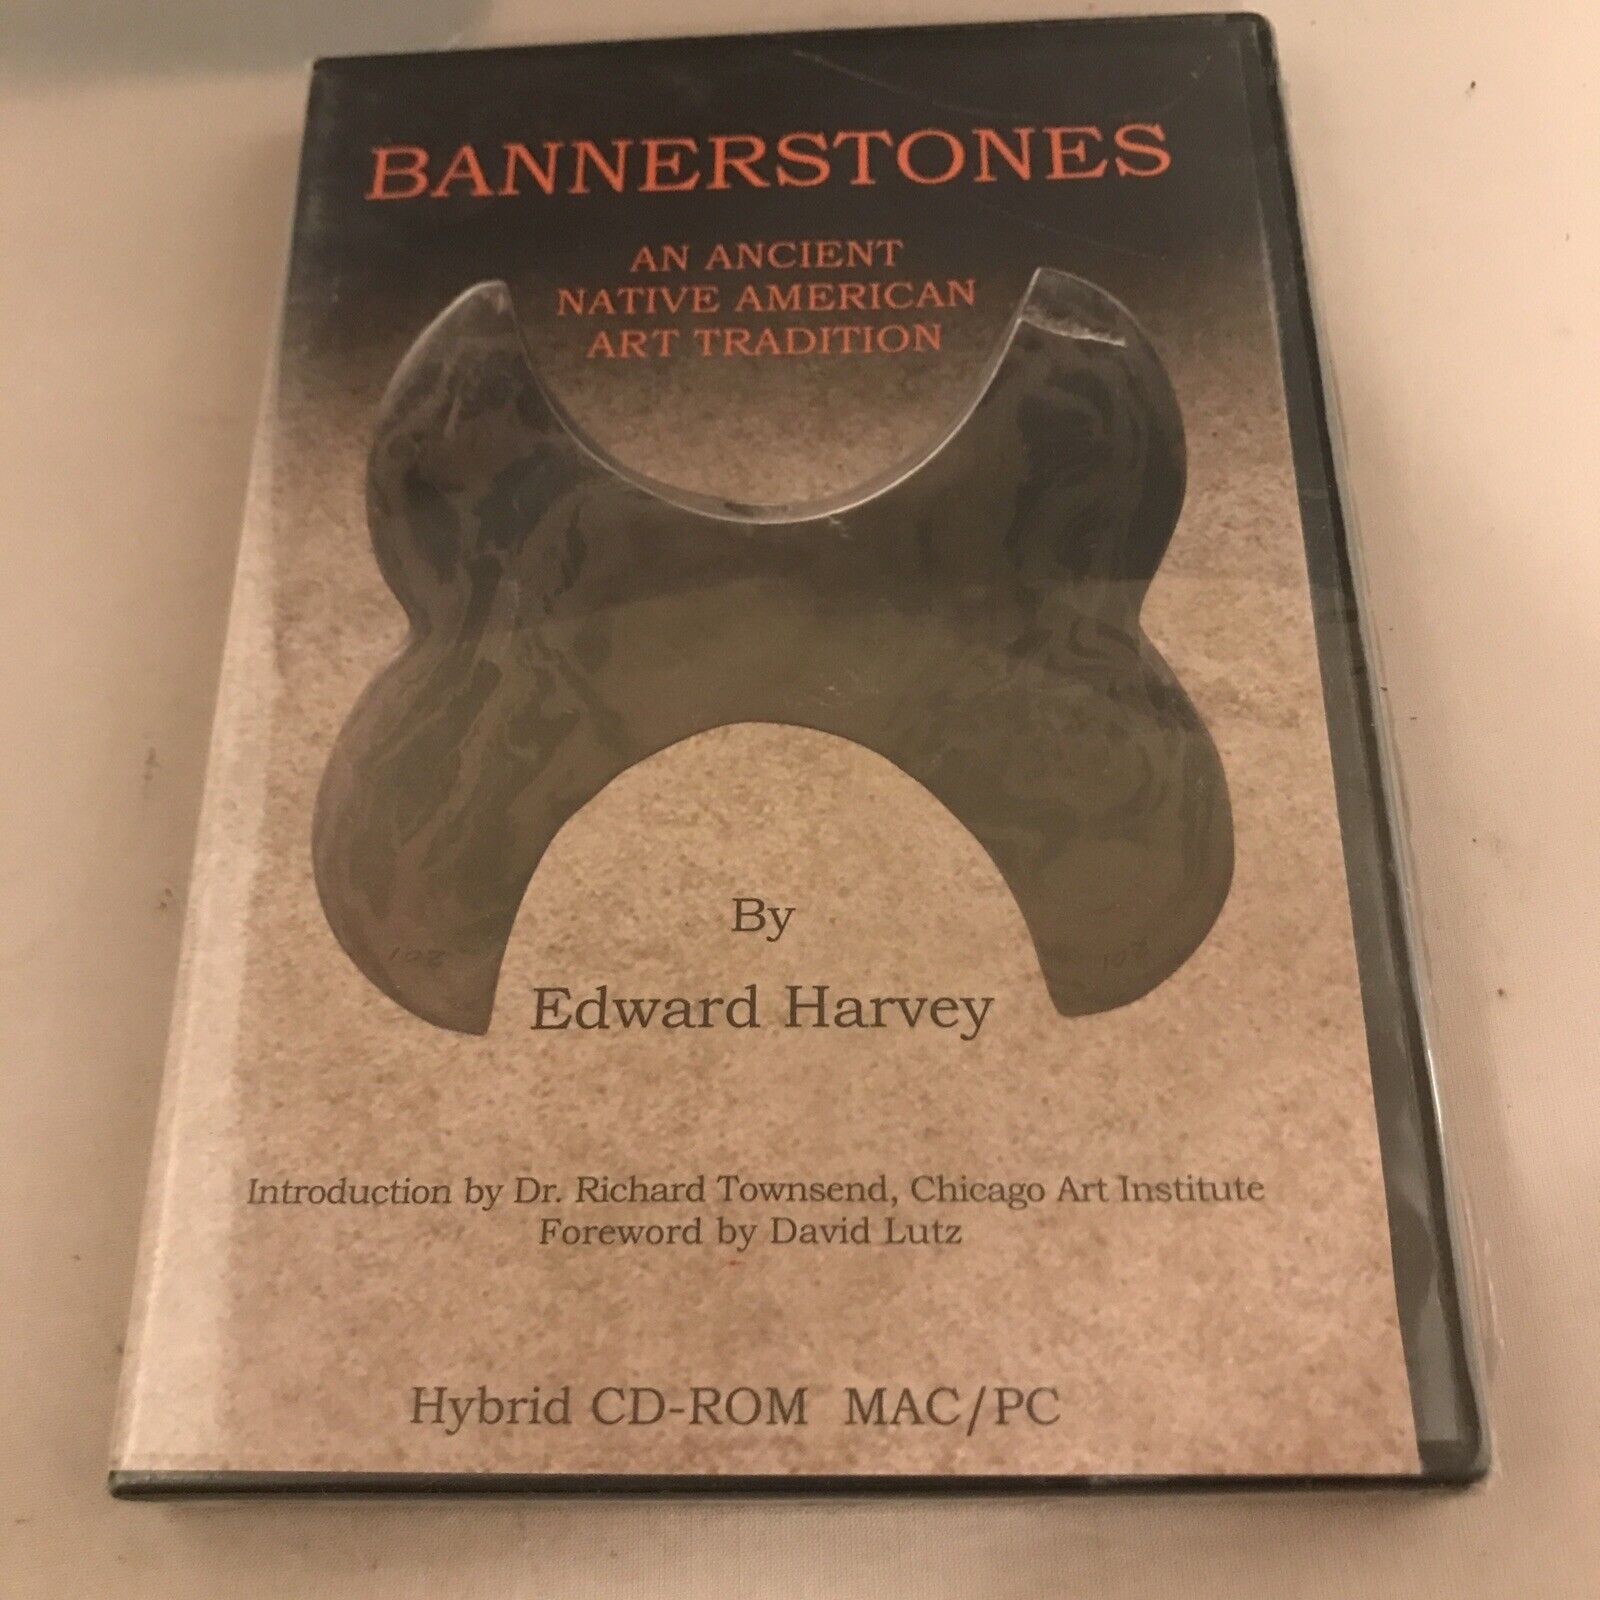 Bannerstones An Ancient Native American Art Tradition CD-ROM by Edward Harvey